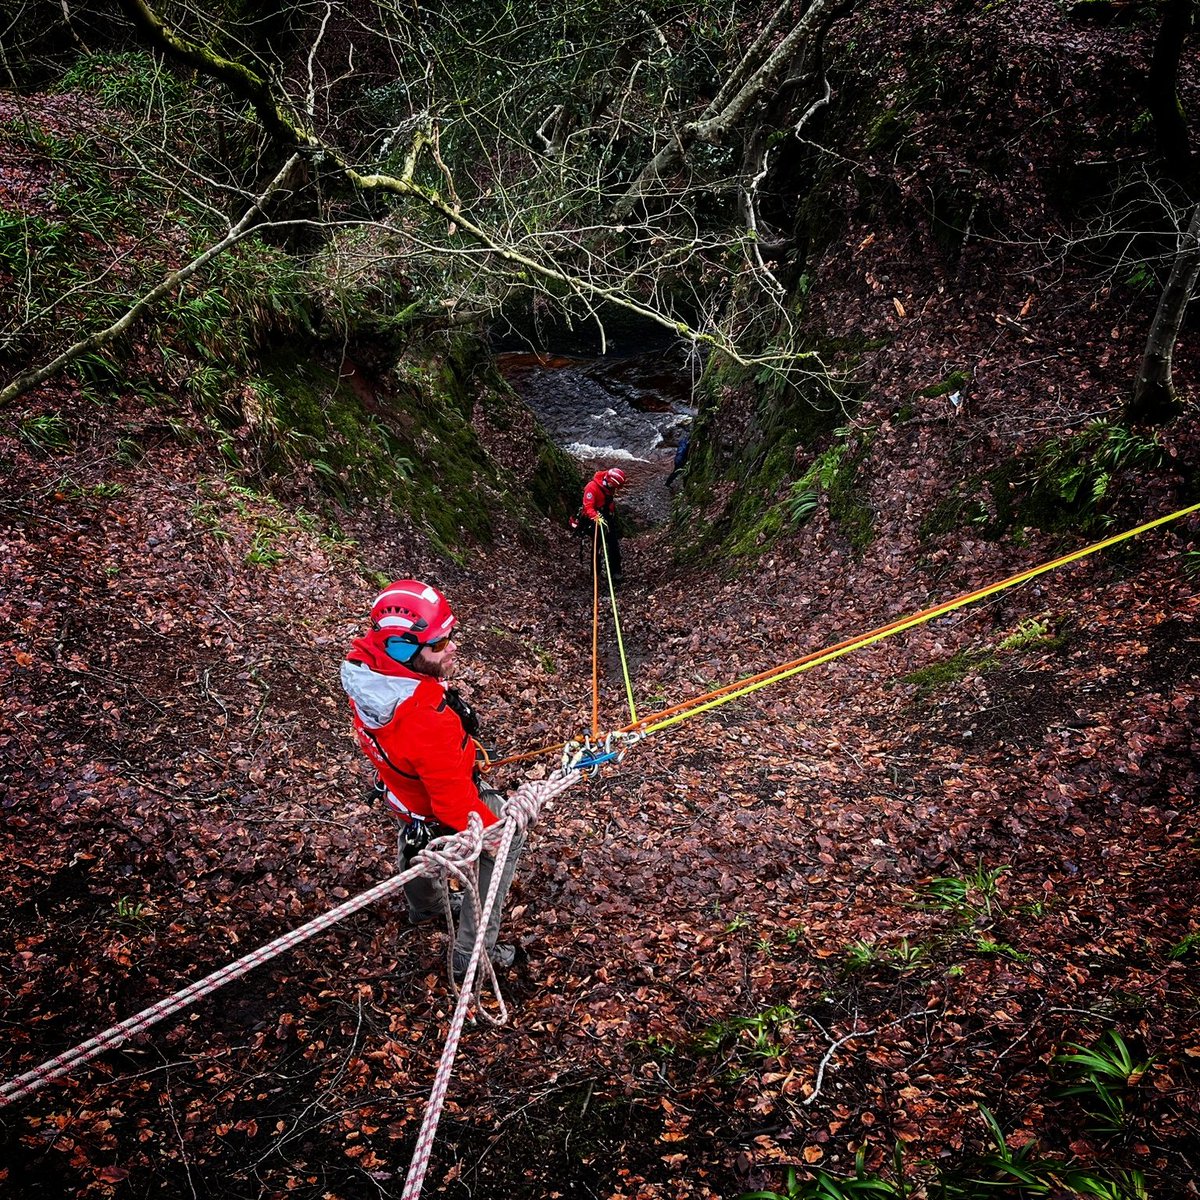 #CallOut 3/24 At 12:01 on Monday, Lomond MRT were alerted by Police Scotland that an individual had fallen down a gully at Finnich Glen and was unable to get back out. The exact location turned out to be a familiar part of the Devils Pulpit.